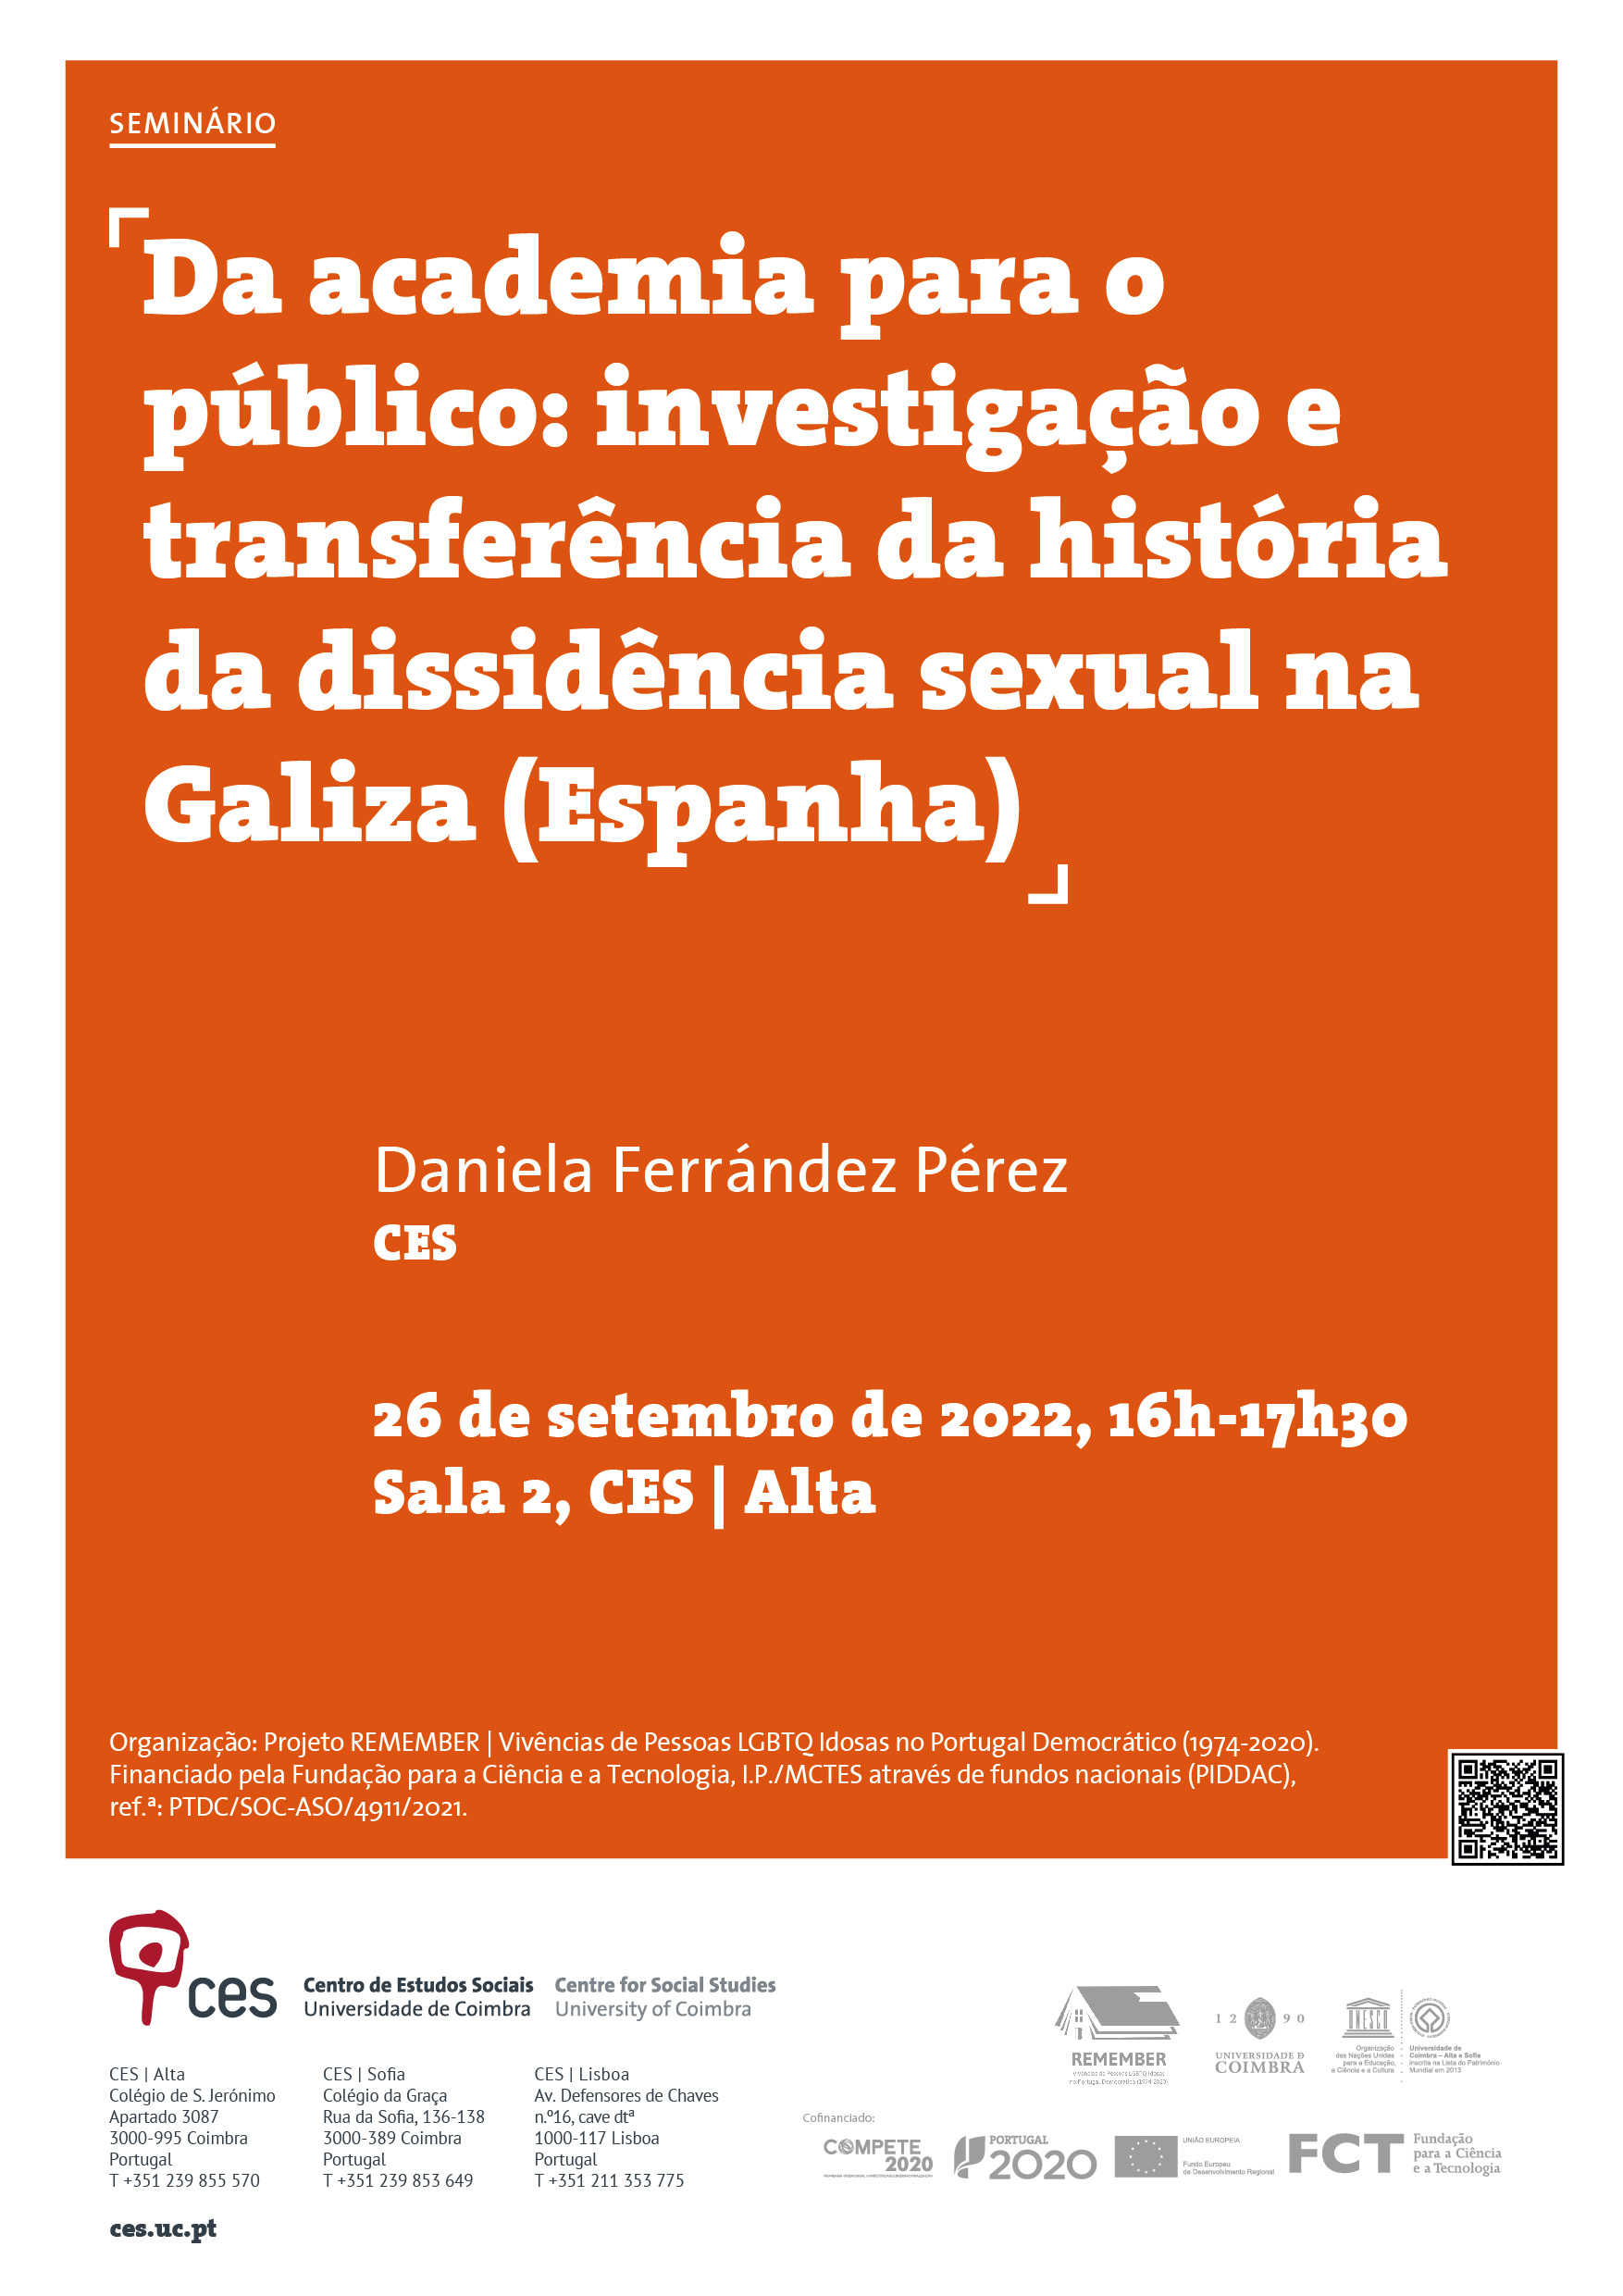 From academia to the public: researching and transferring the history of sexual dissidence in Galicia (Spain)<span id="edit_39418"><script>$(function() { $('#edit_39418').load( "/myces/user/editobj.php?tipo=evento&id=39418" ); });</script></span>